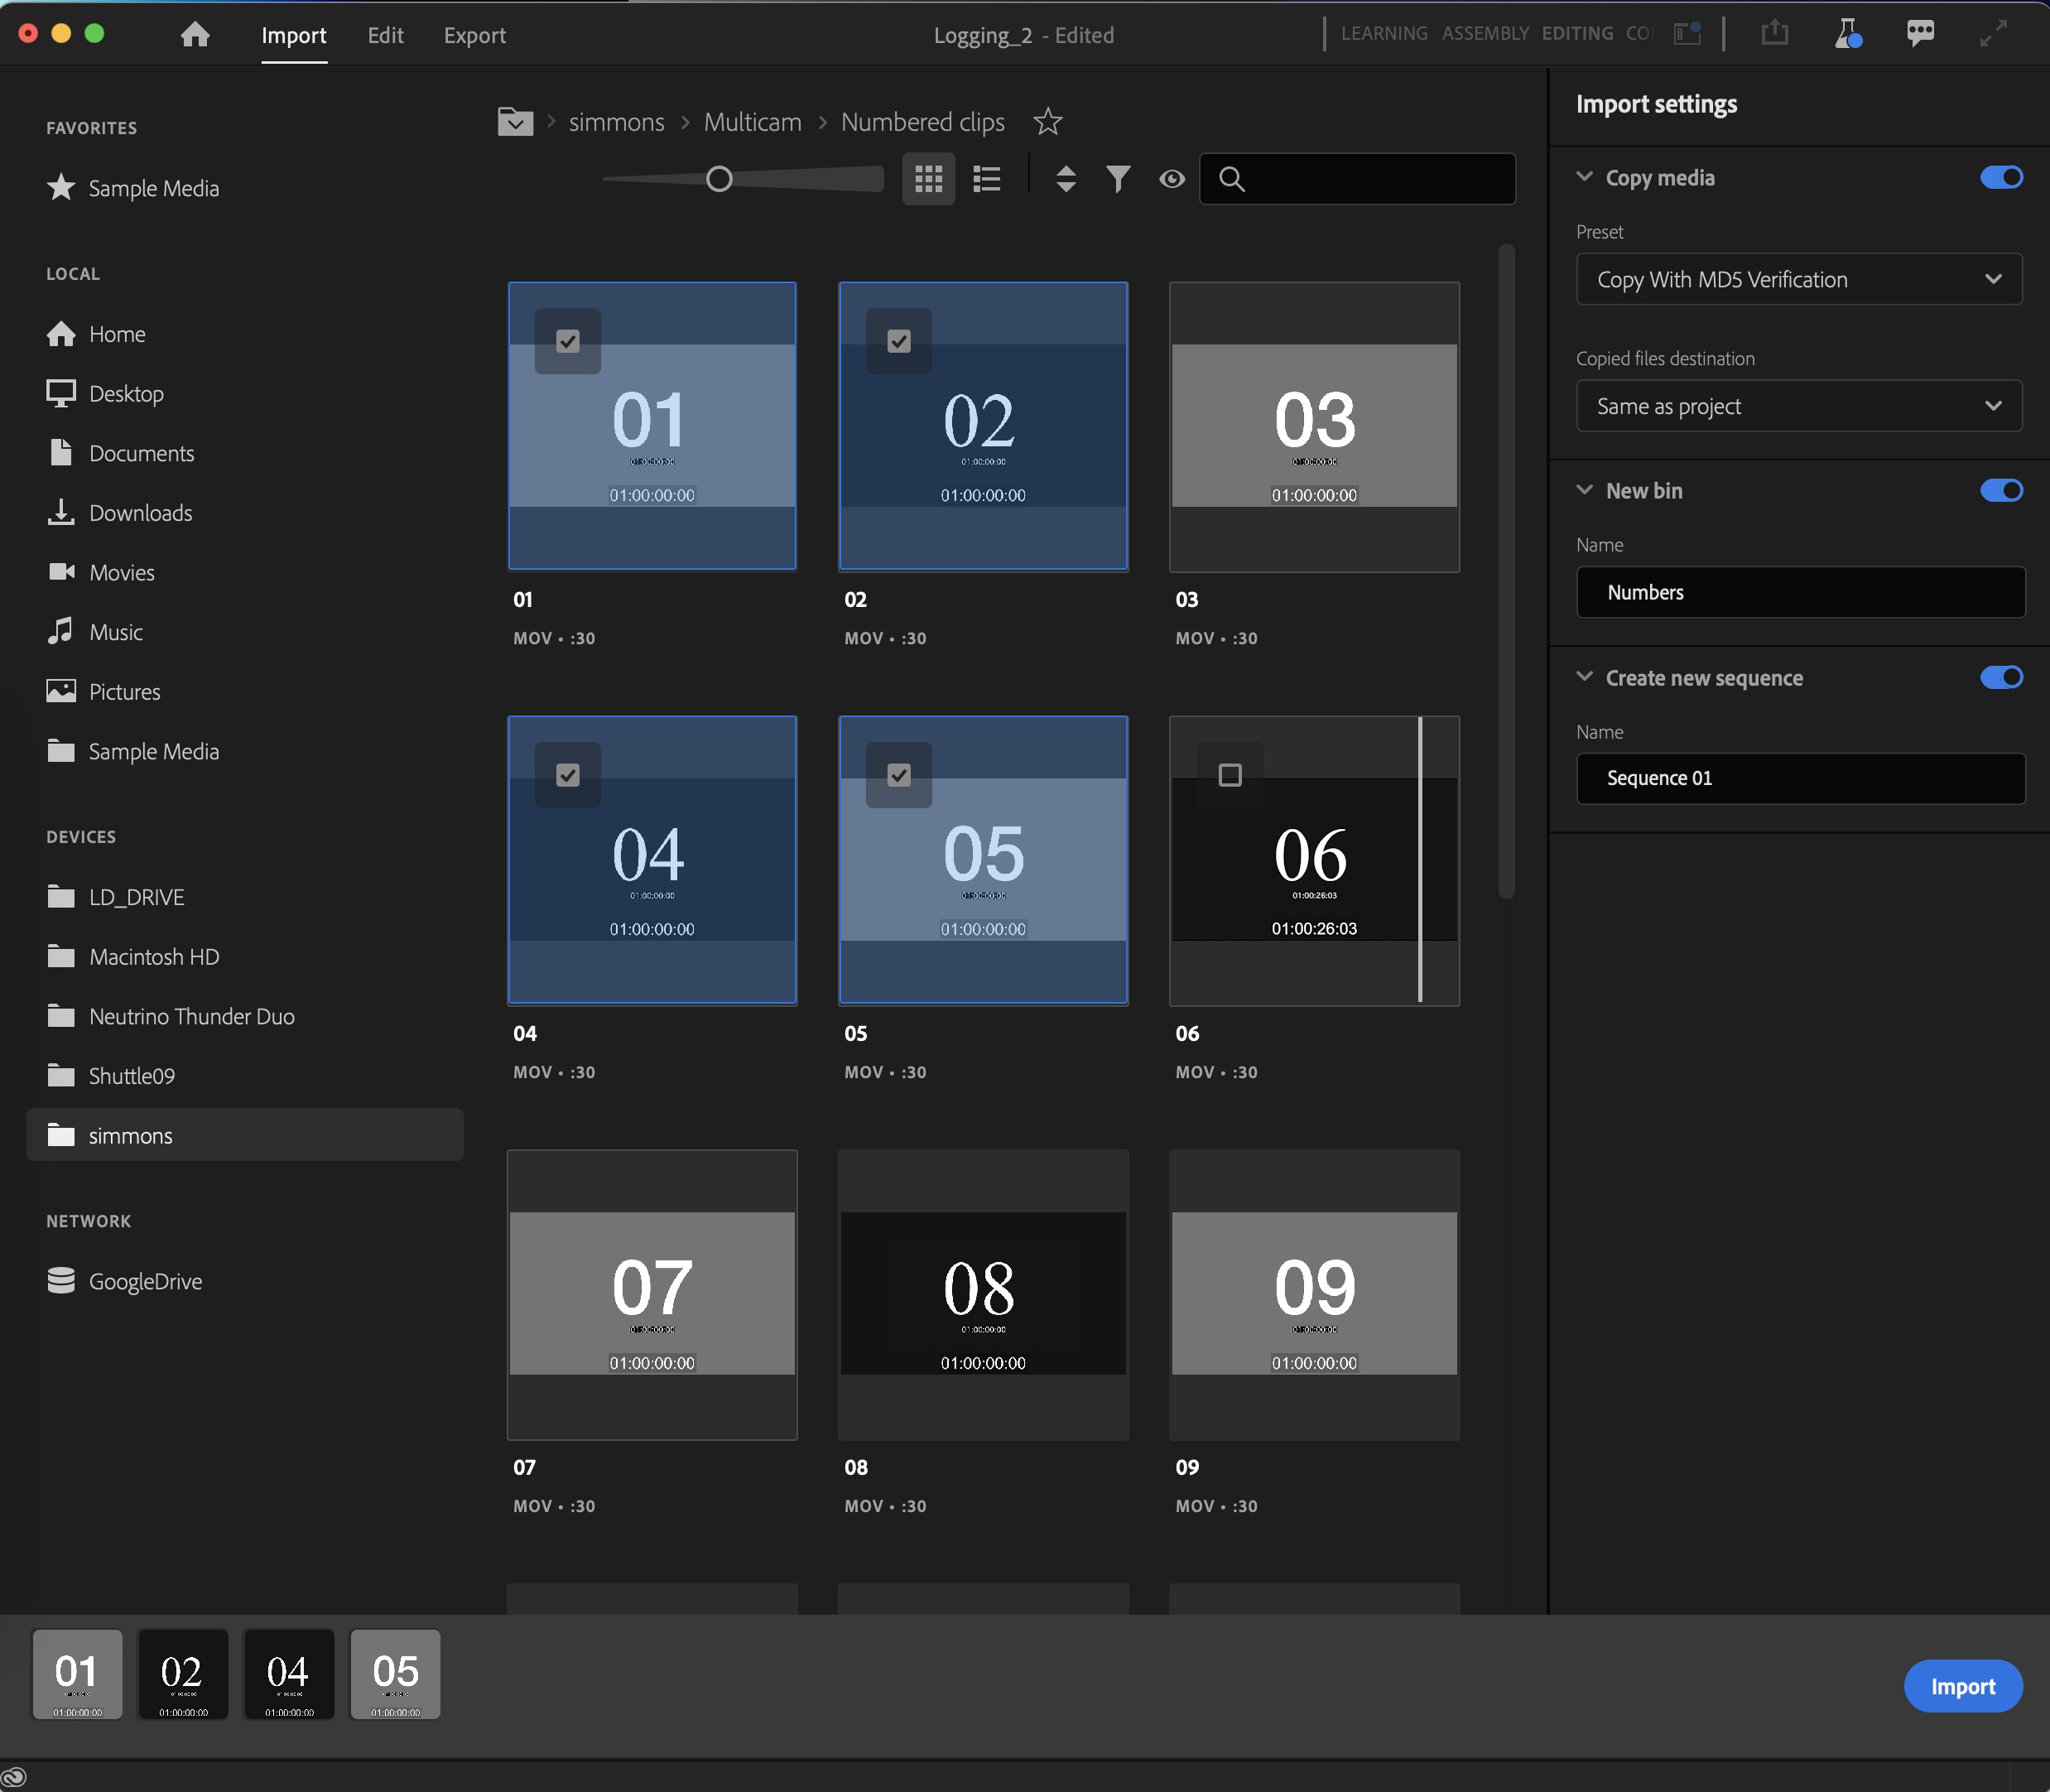 Adobe announces an updated Premiere Pro and After Effects 12